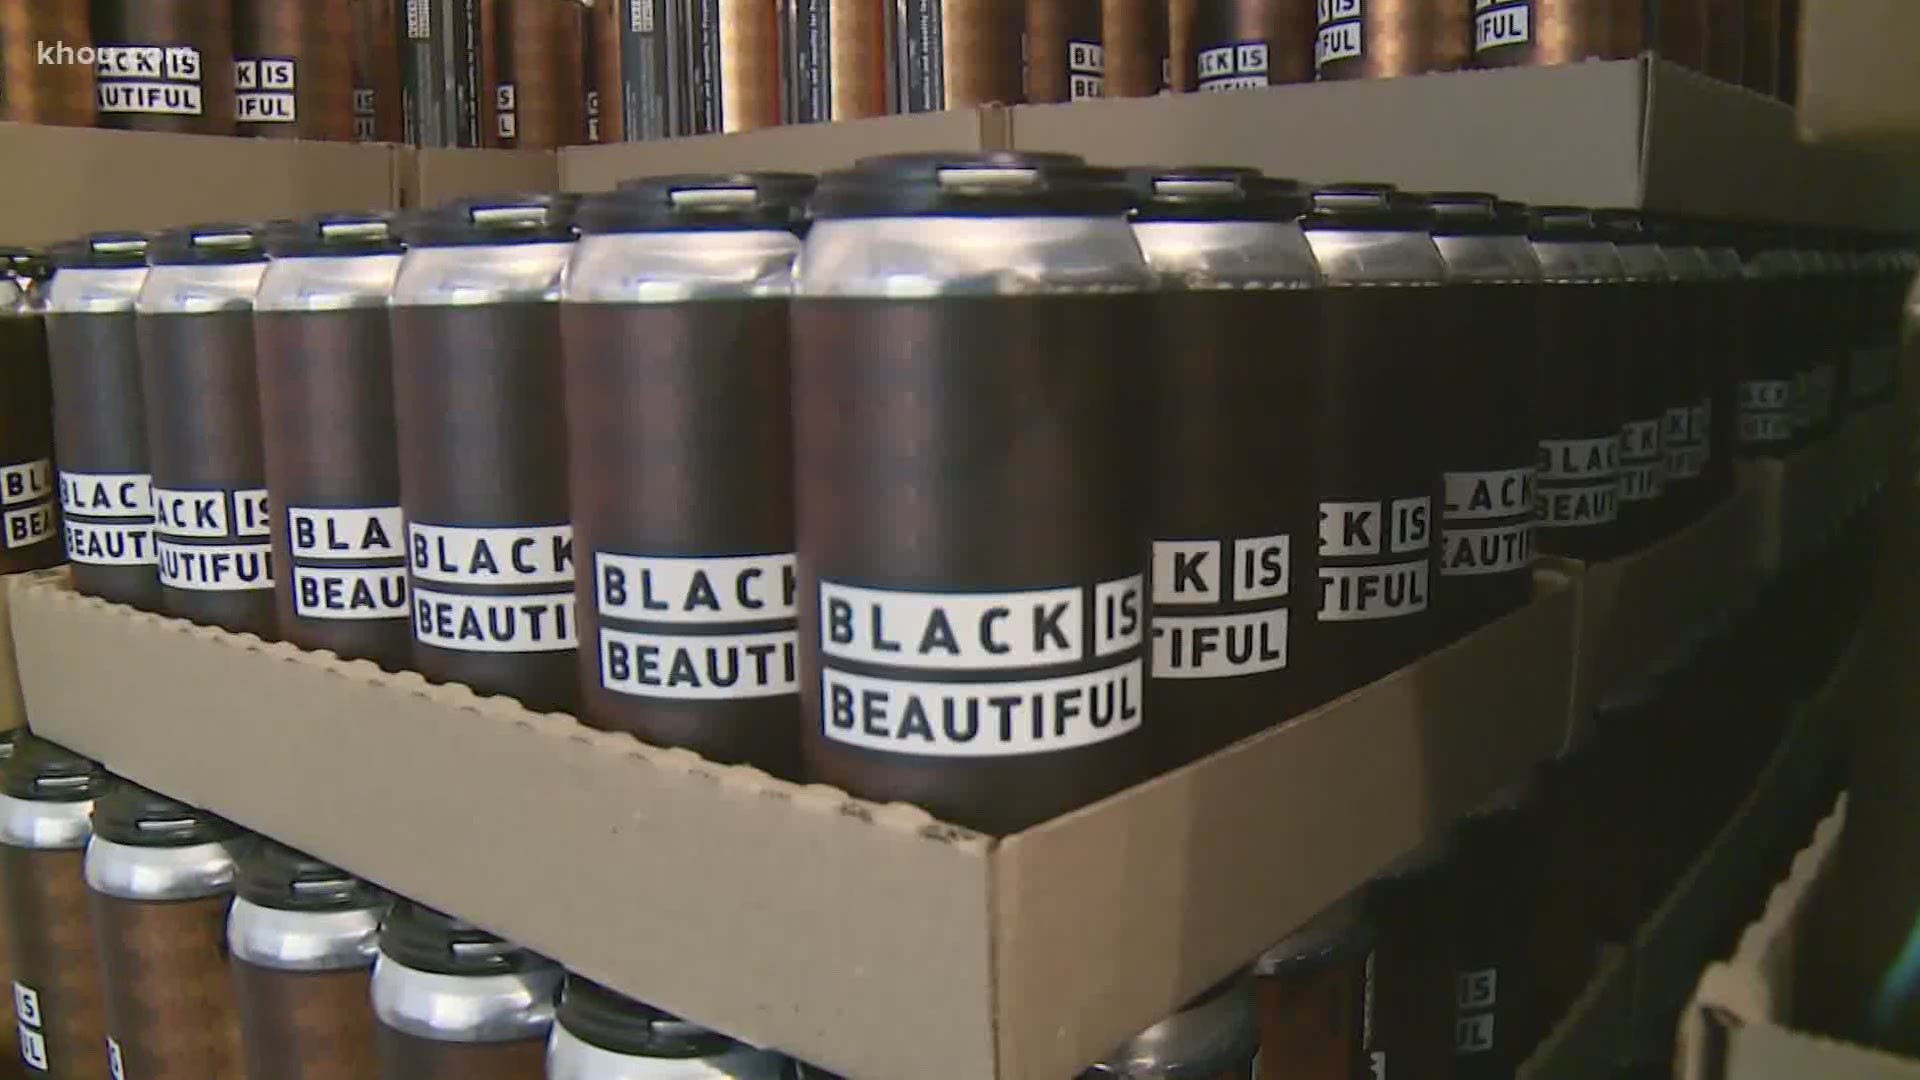 Sigma Brewing Company in Houston is joining the collaborative worldwide effort to raise awareness for the injustices people of color face daily.